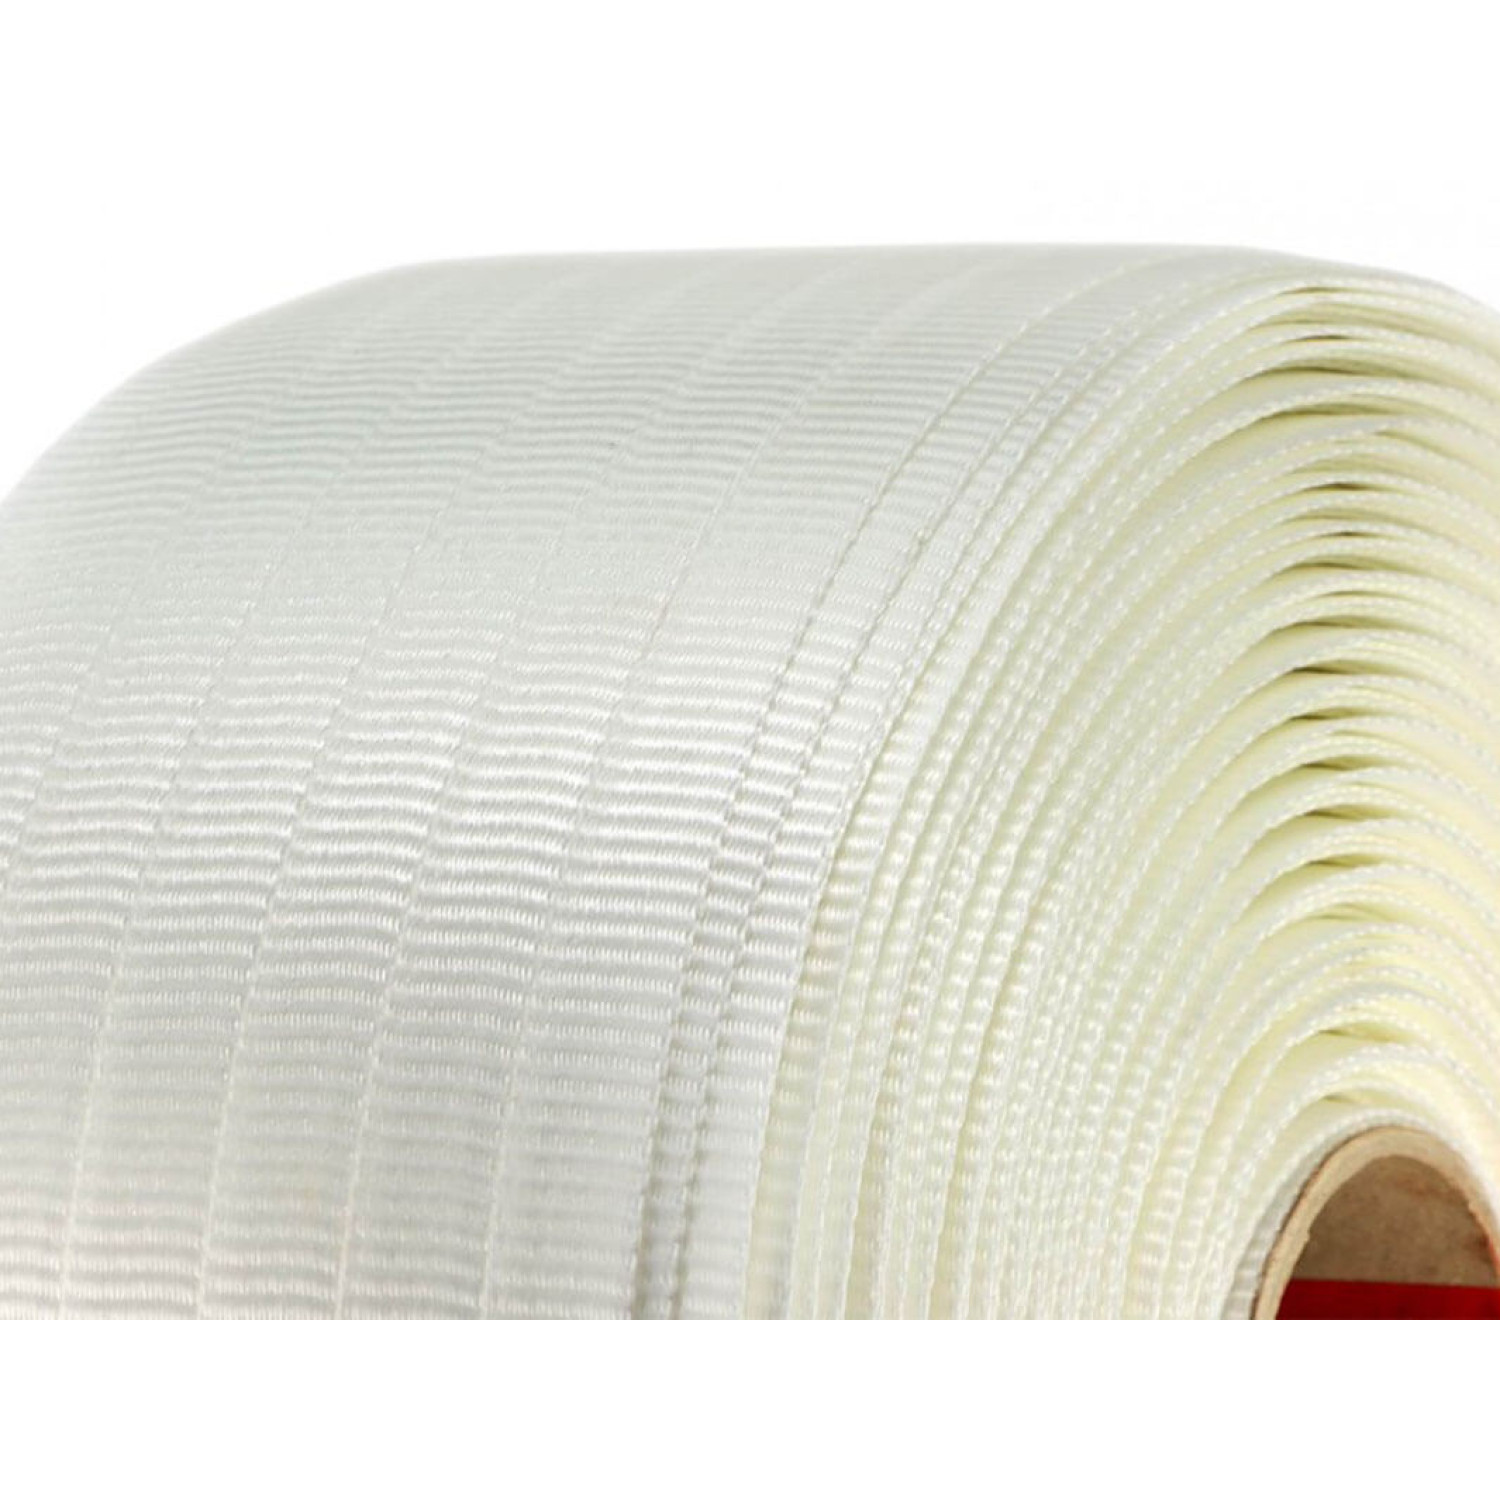 Woven Polyester Cord Strapping White 3/4” X 1640' Tensile Strength 1830LB -  Canada Wide Packaging, Cord Strapping,Phosphate Buckles